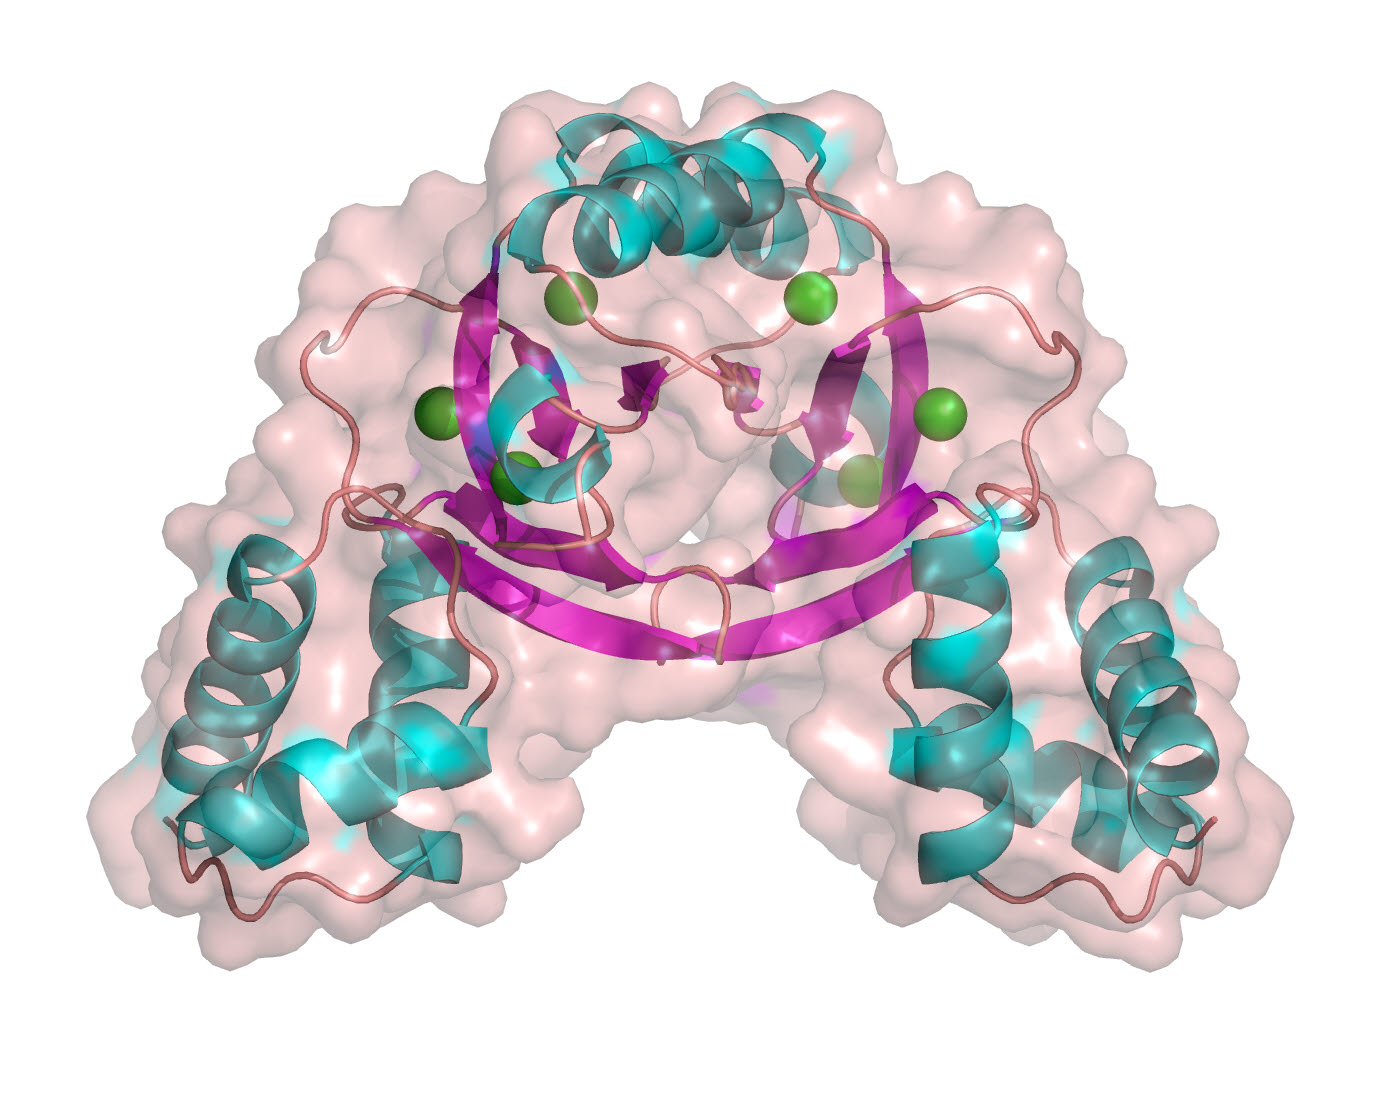  Three dimensional structure of a Zur protein